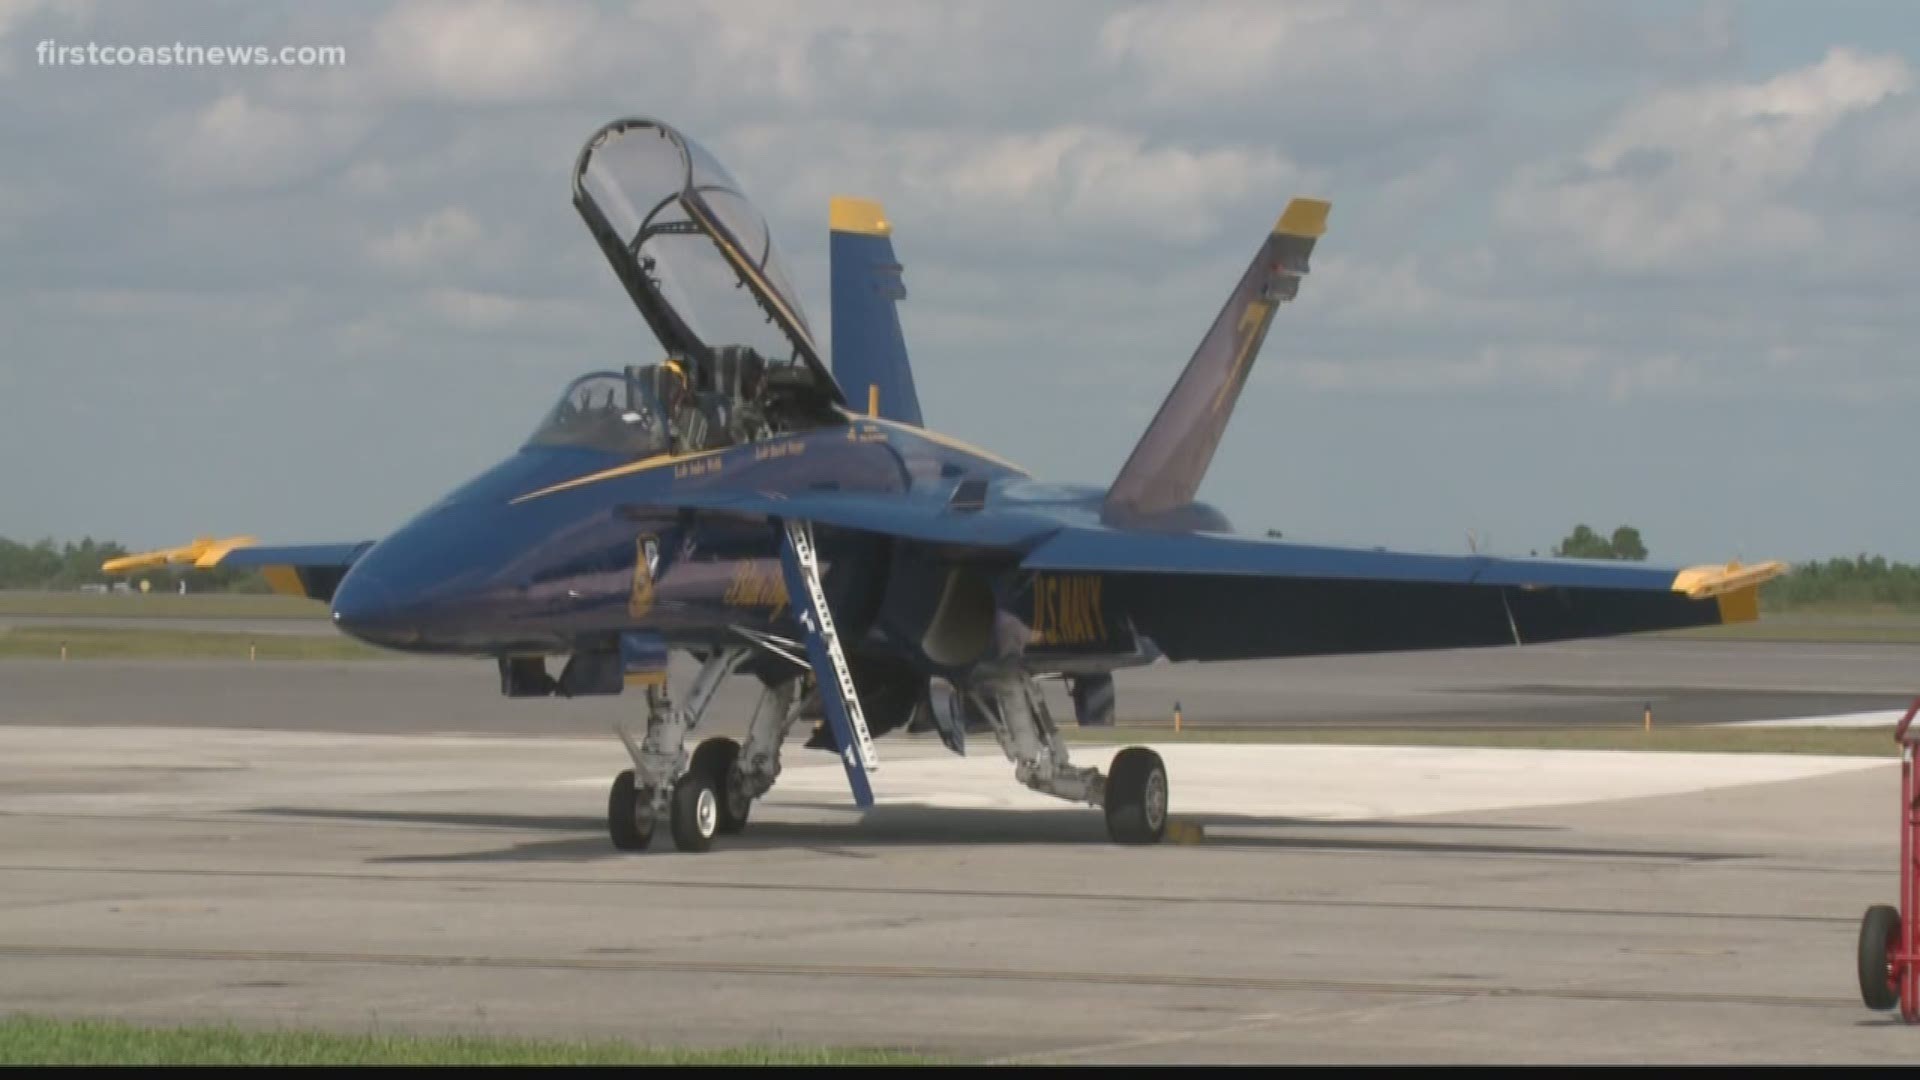 NAS Jax Air Show gives 'key influencers' the chance to fly in a Blue